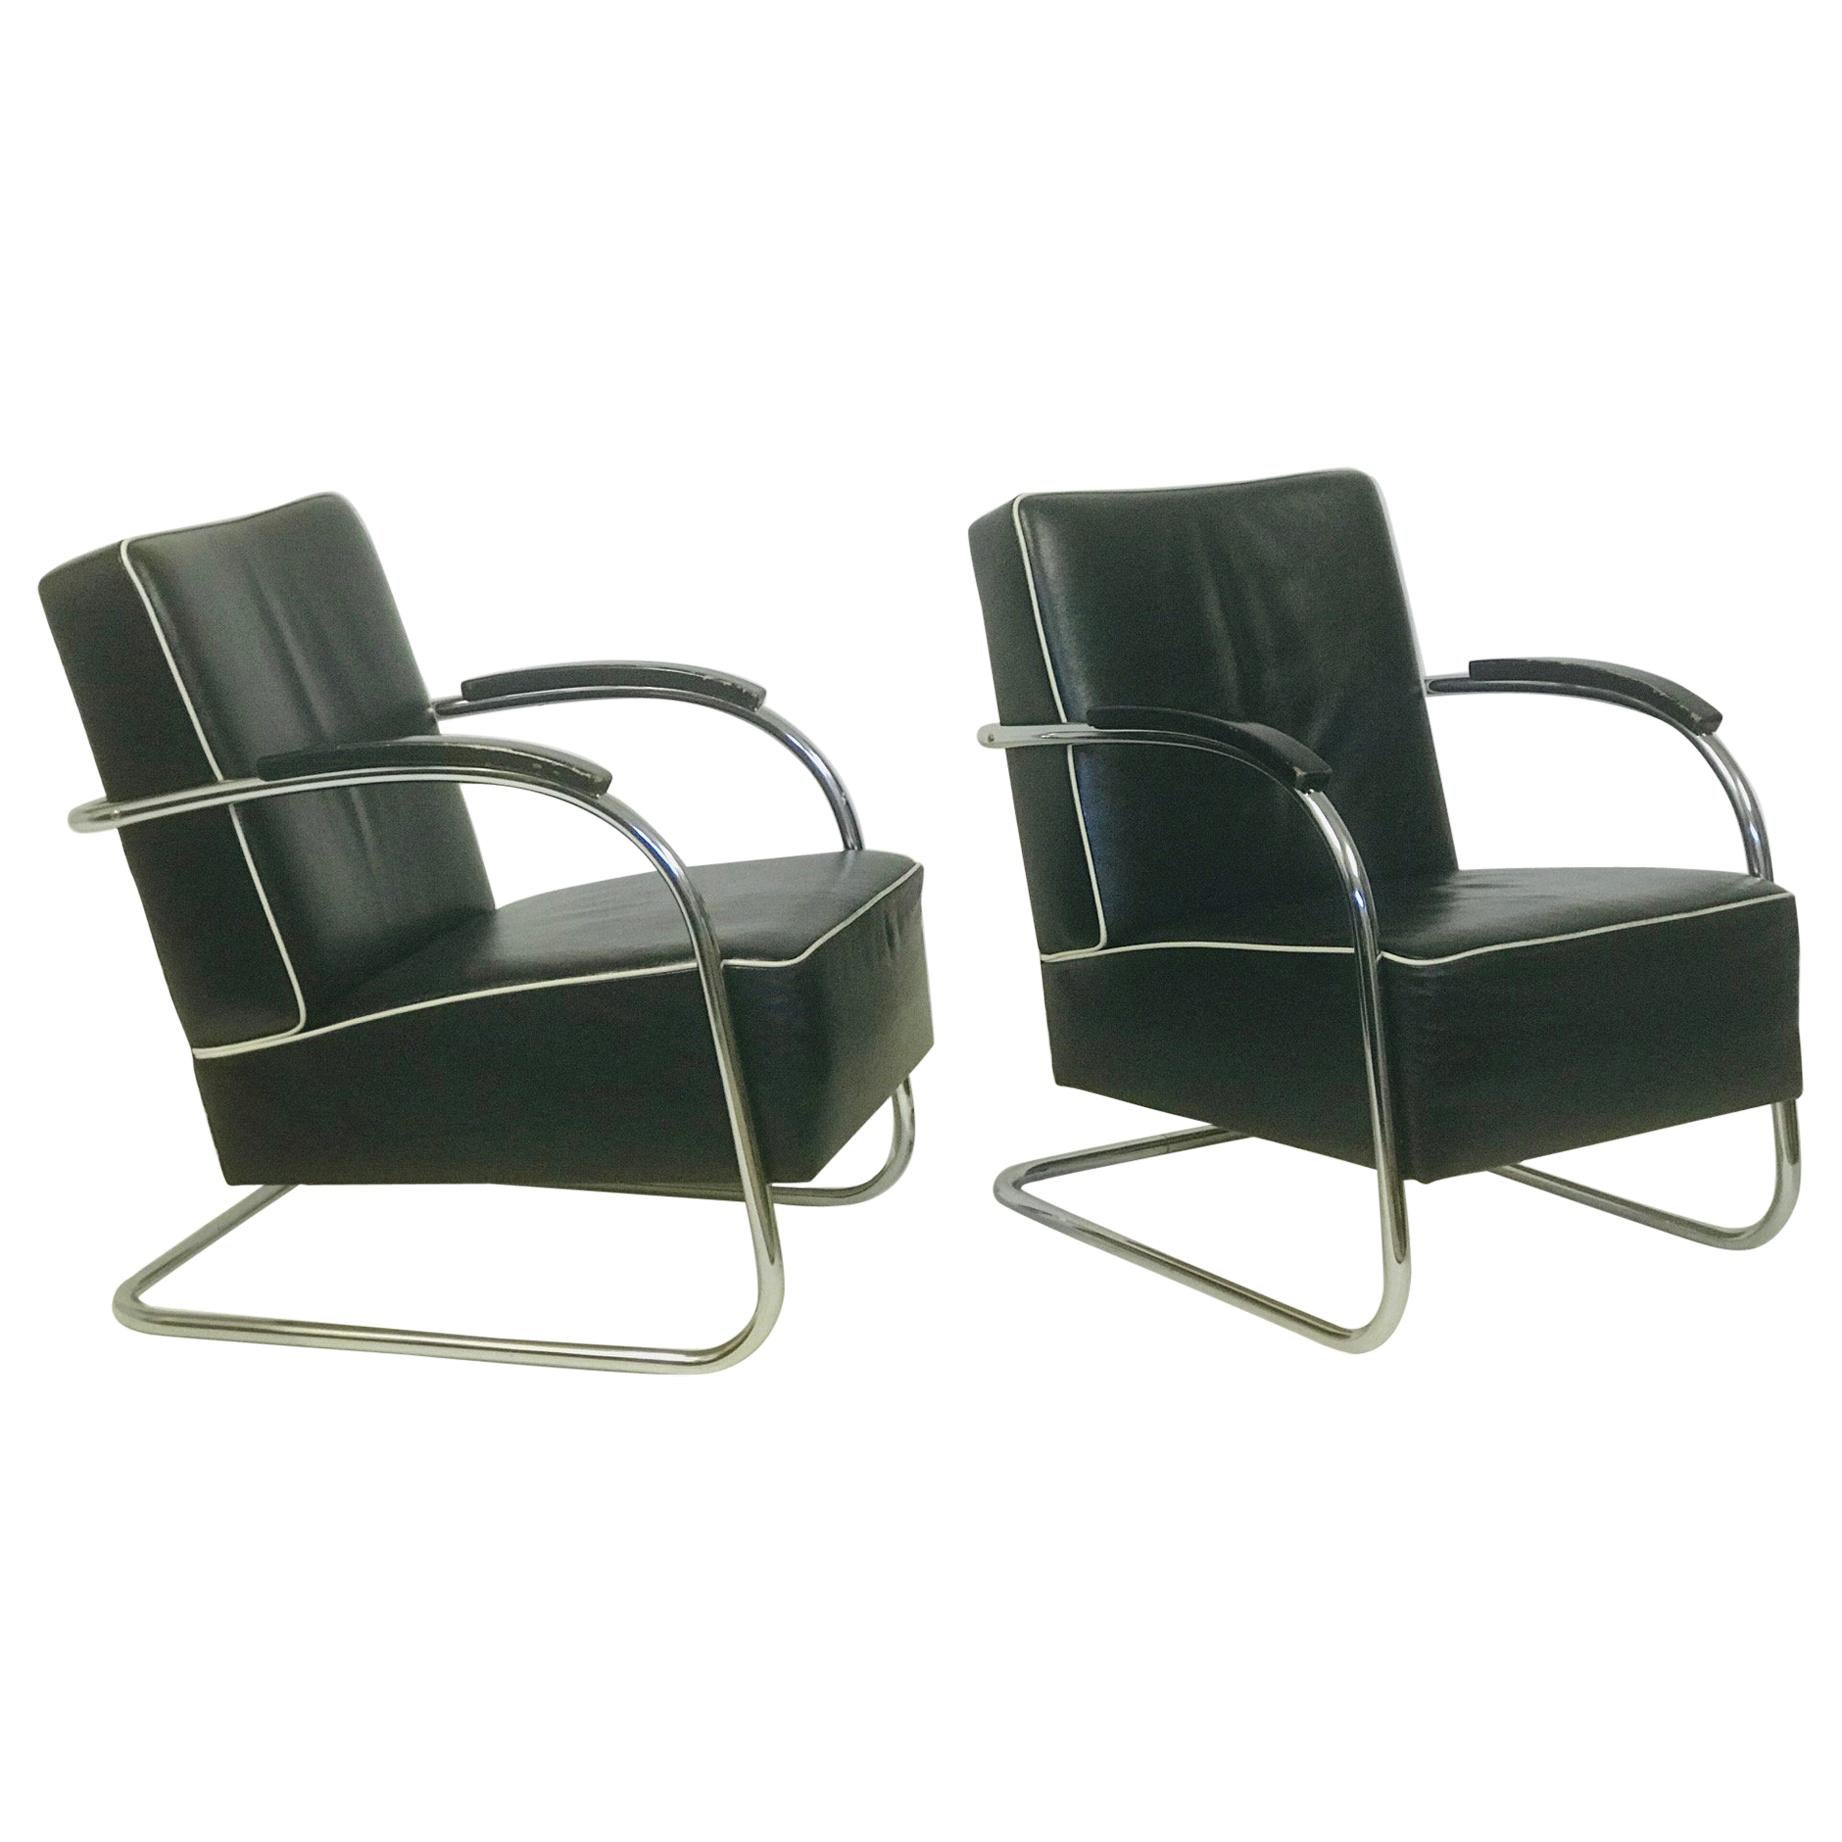 Set of Two Thonet Armchairs, "1930" For Sale